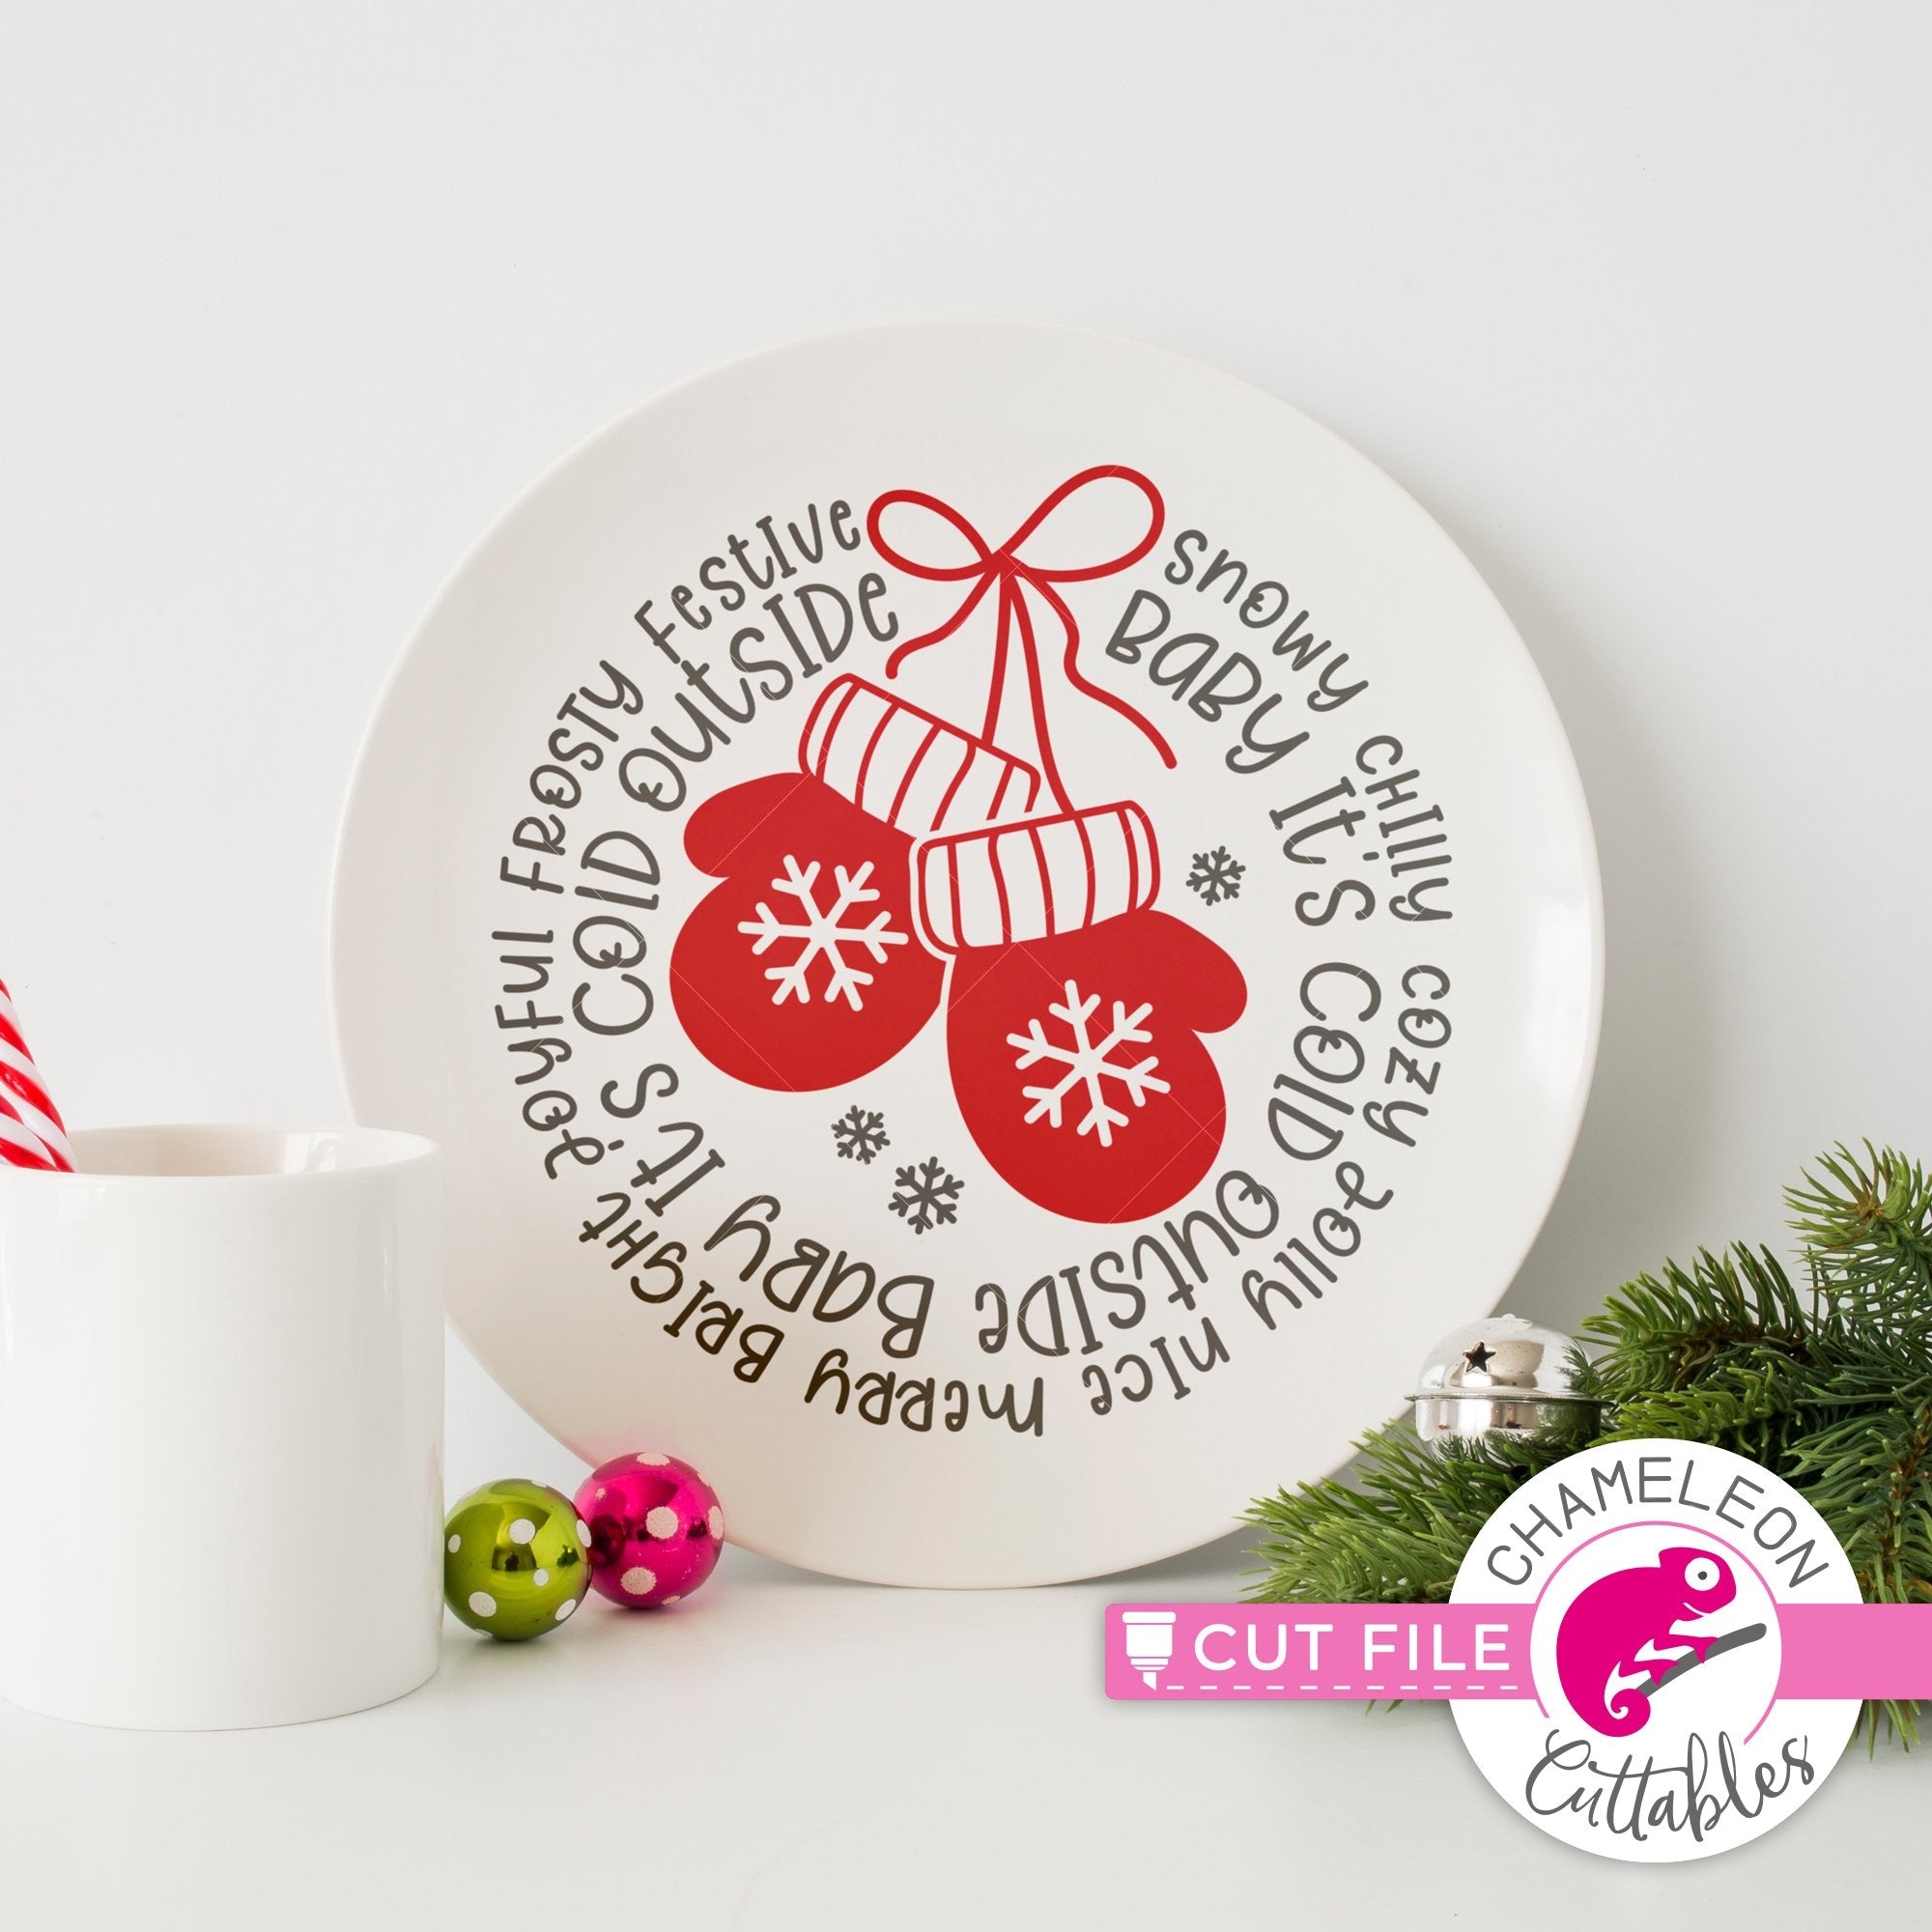 Download Christmas Mittens Word Art Circle Round Svg Png Dxf Eps Jpeg Chameleon Cuttables Llc Chameleon Cuttables Llc